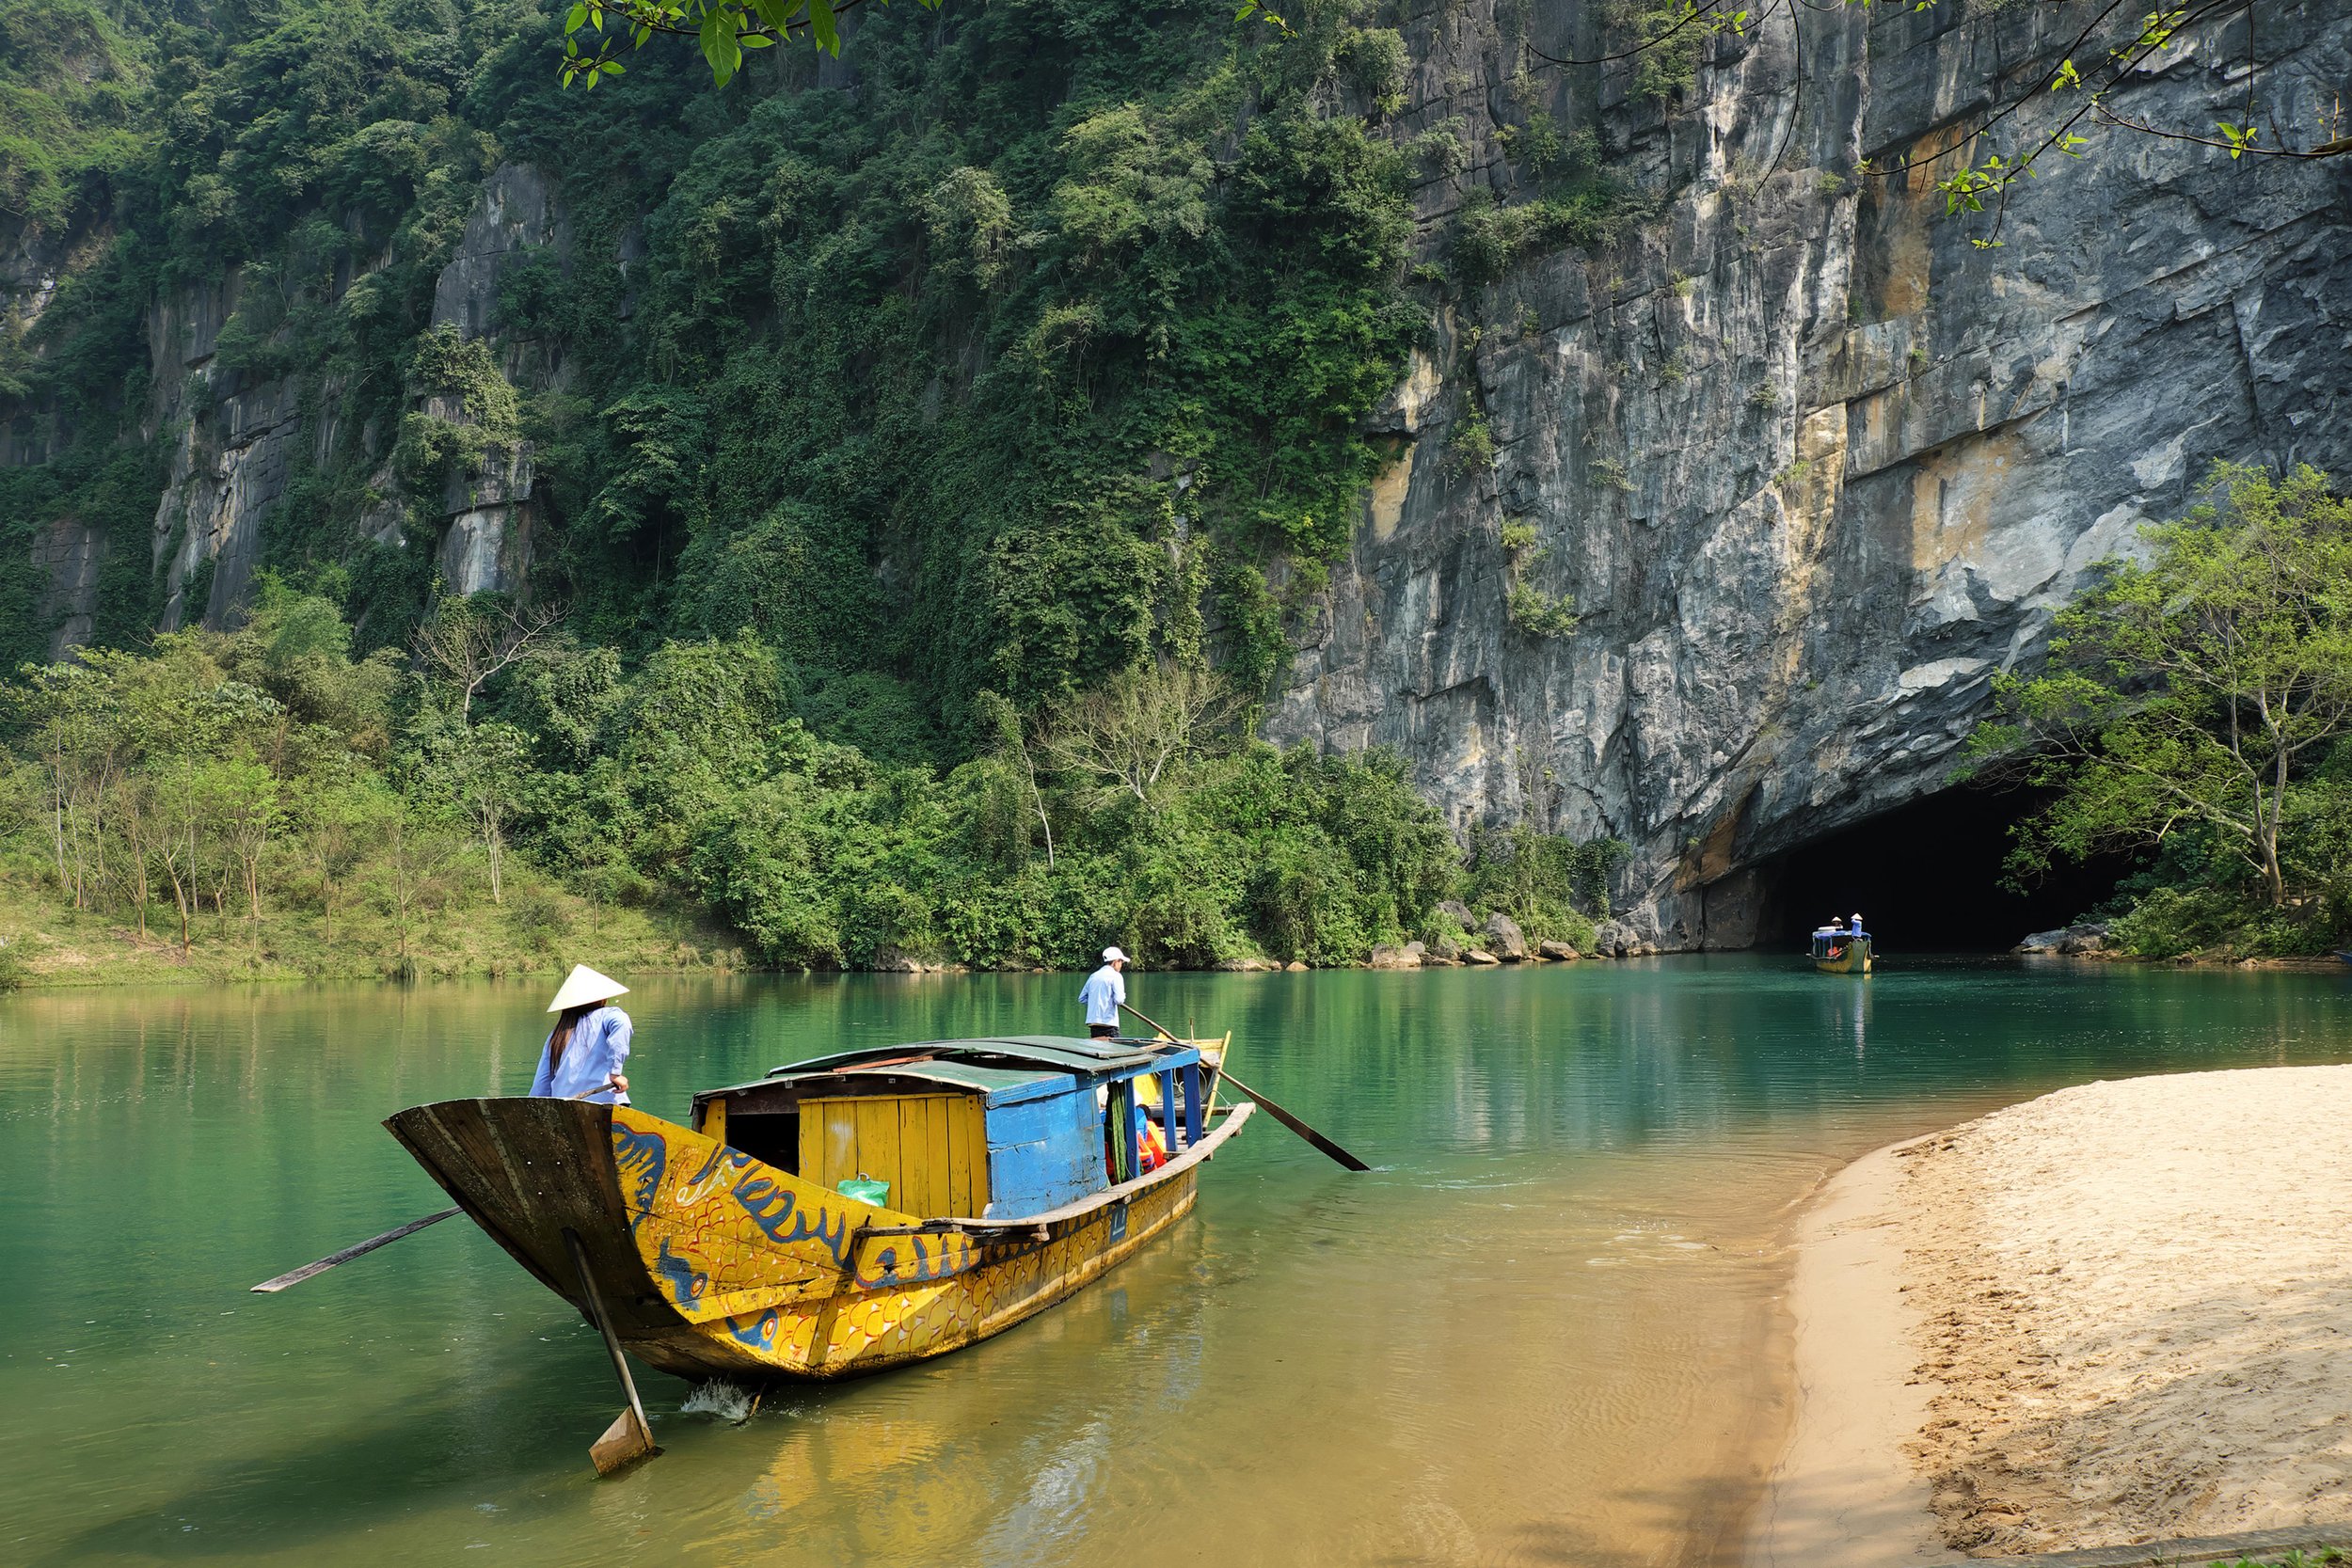 The entrance to Phong Nha cave;